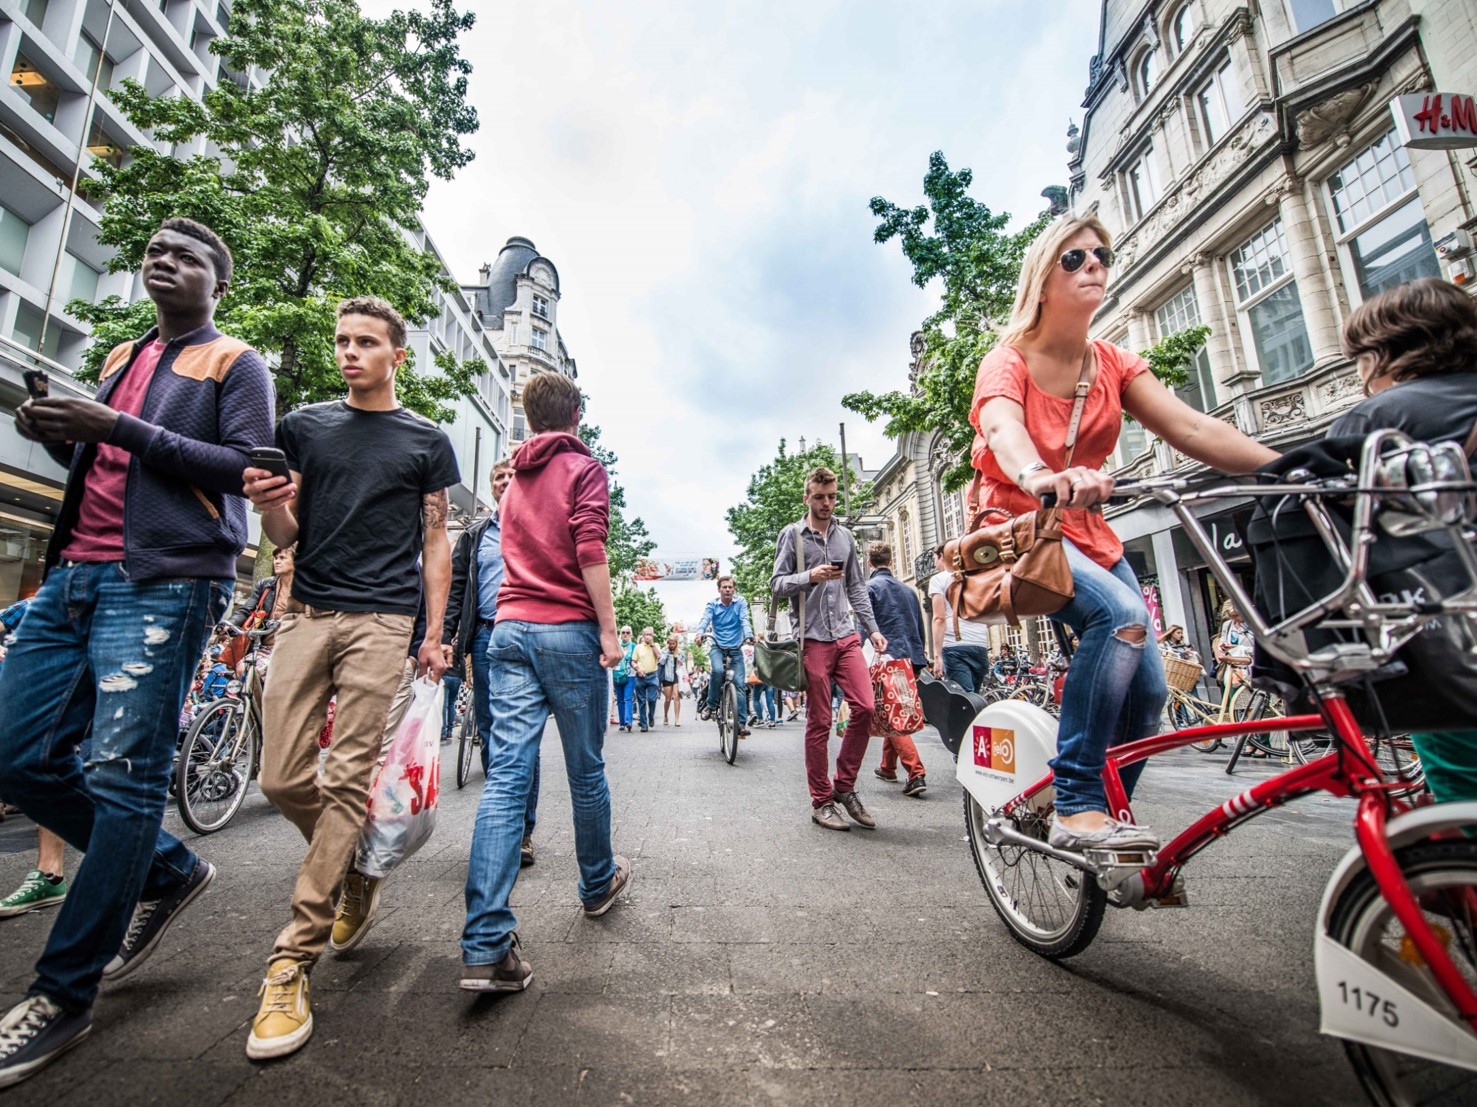   Bicycle policy plan of Antwerp city 2015-2019